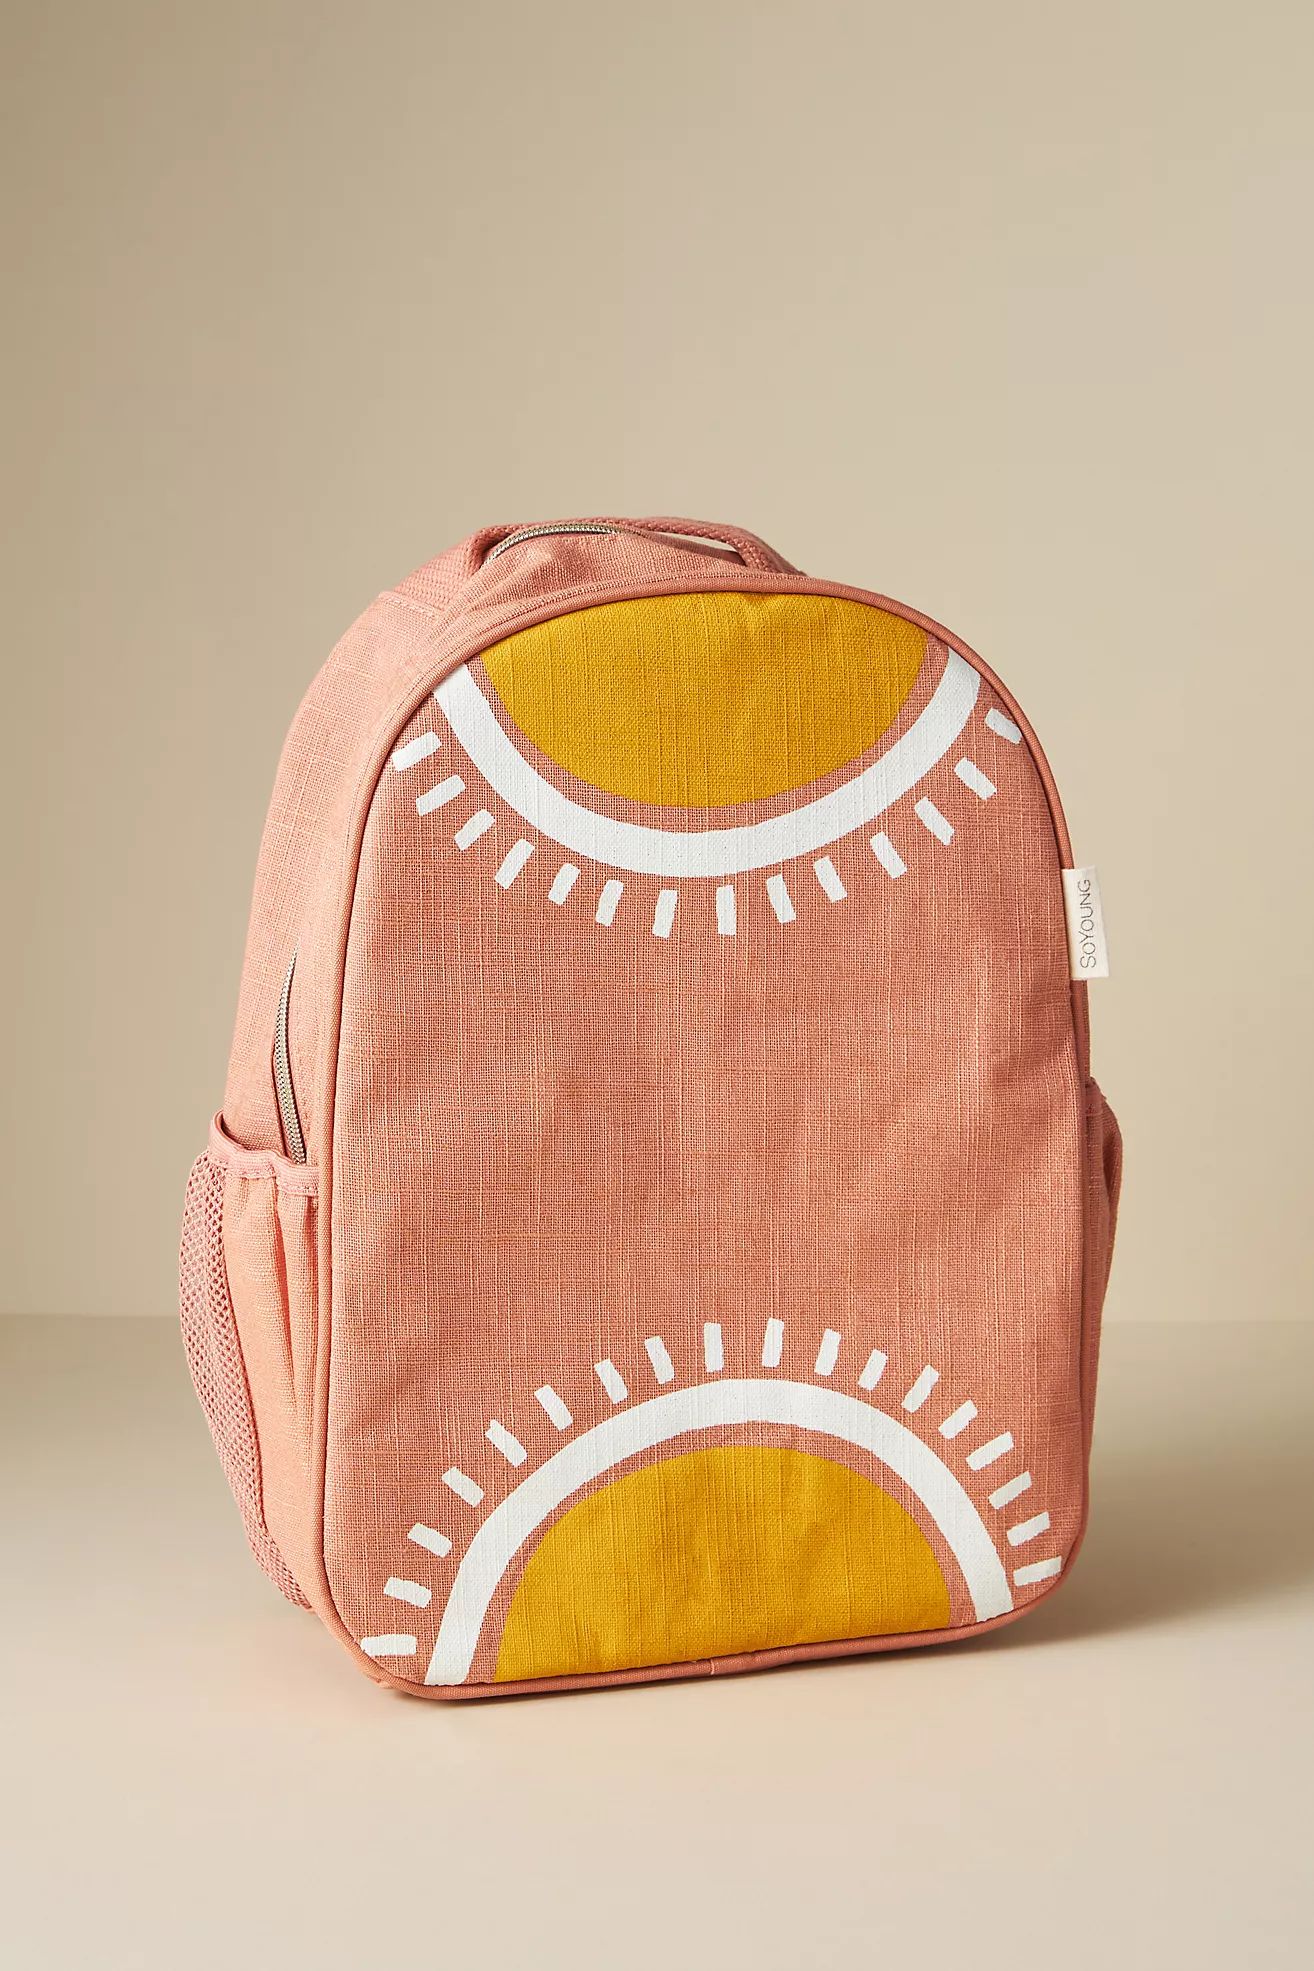 SoYoung Kids Backpack | Anthropologie (US)